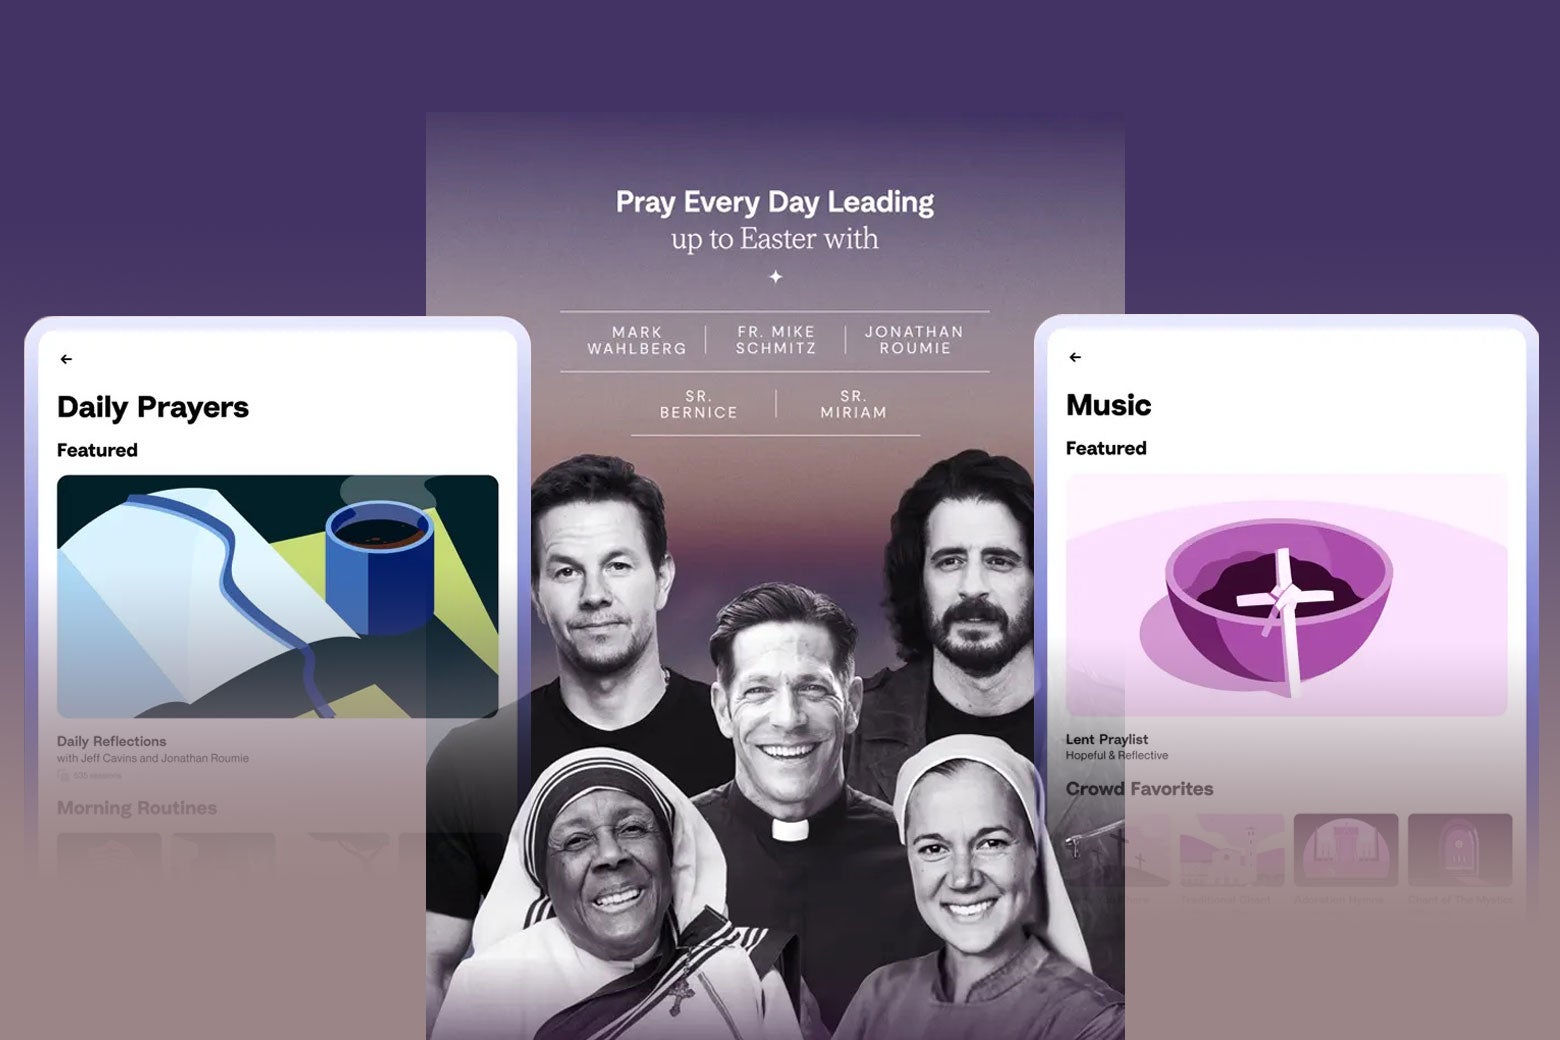 There Are a Few Strange Things About That Prayer App Mark Wahlberg Hawked During the Super Bowl